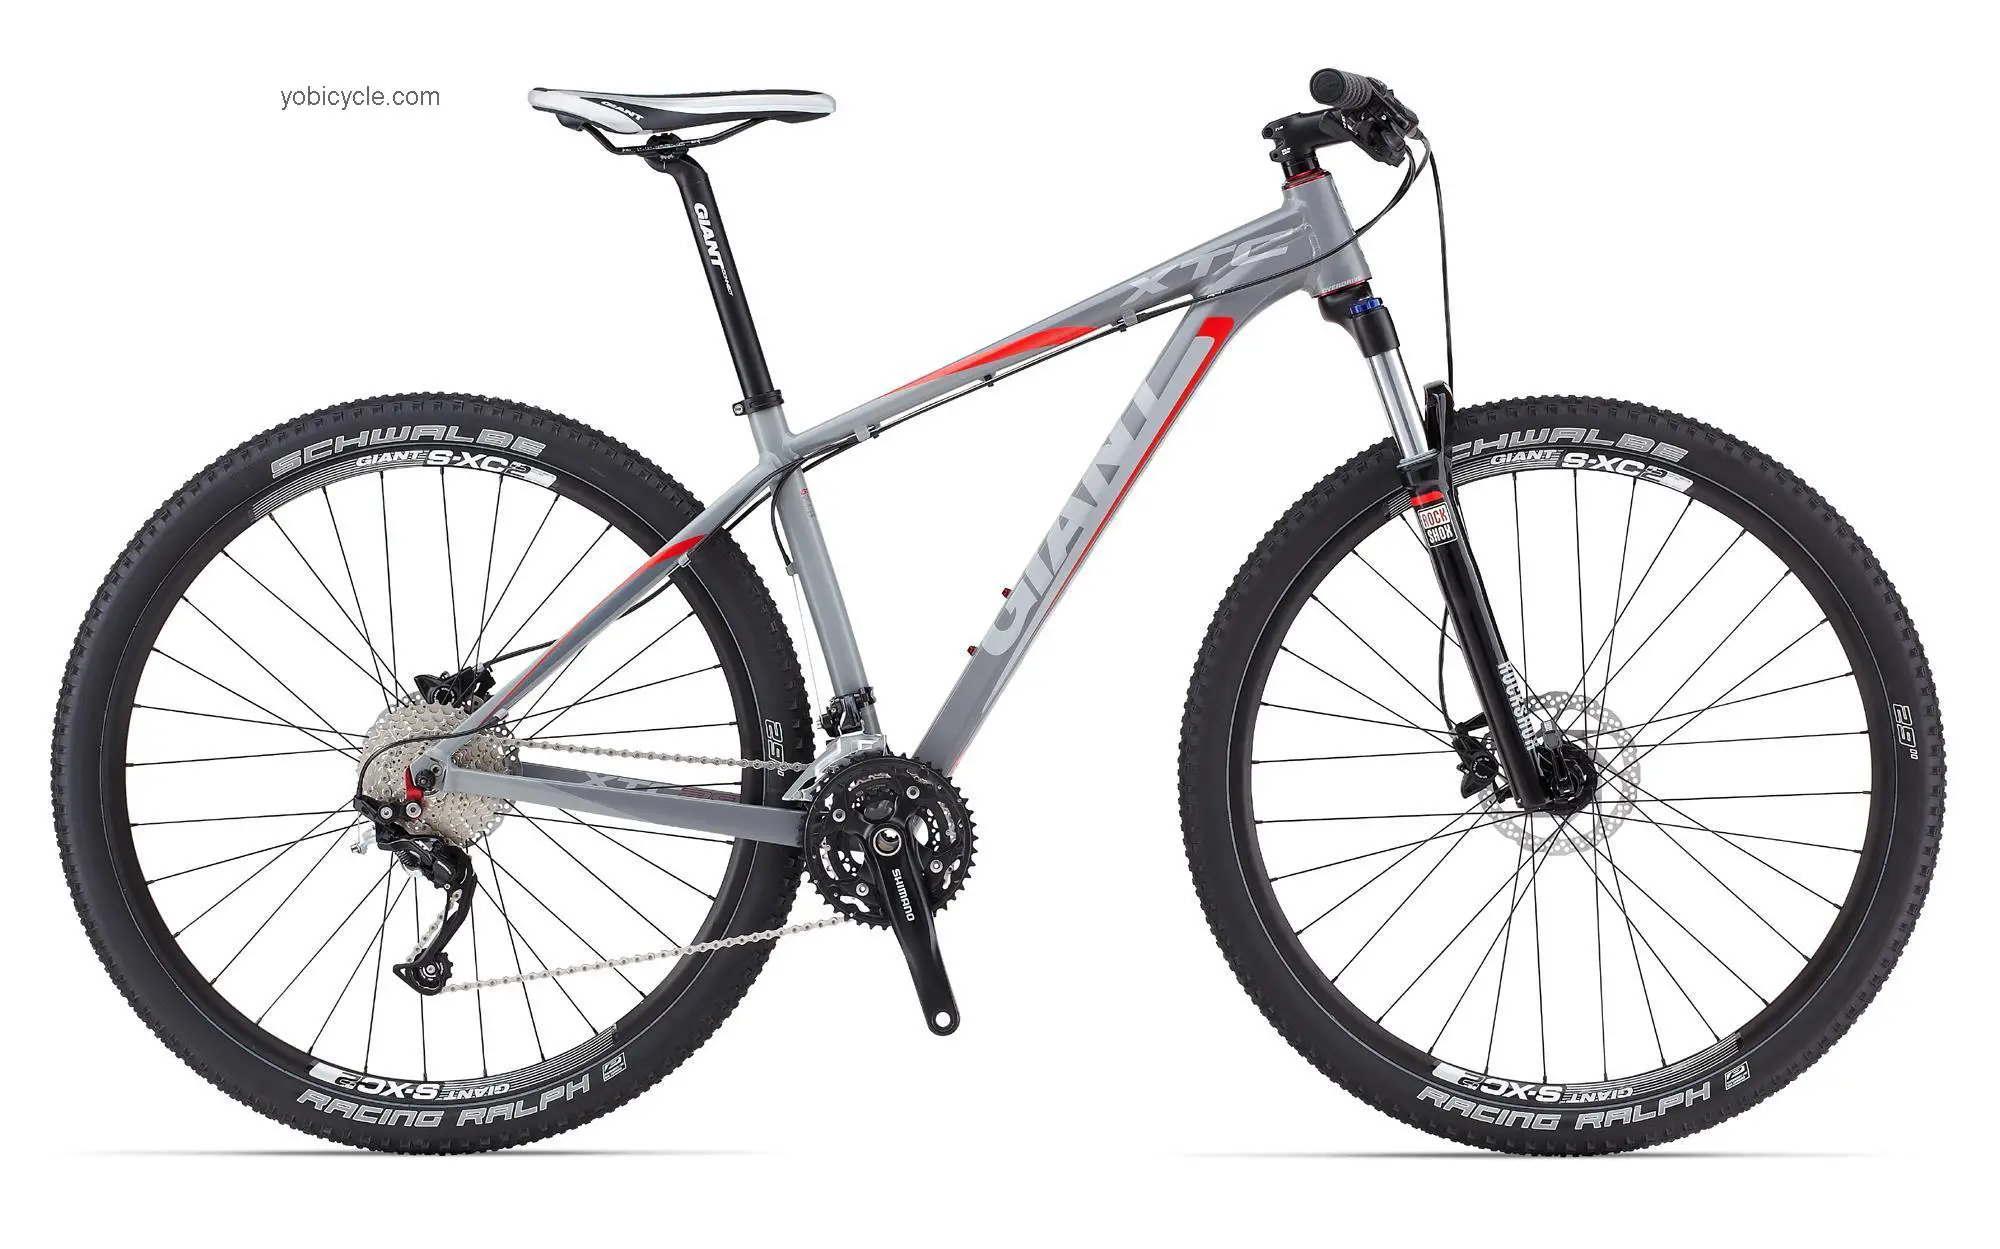 Giant XTC 29er 2 2013 comparison online with competitors